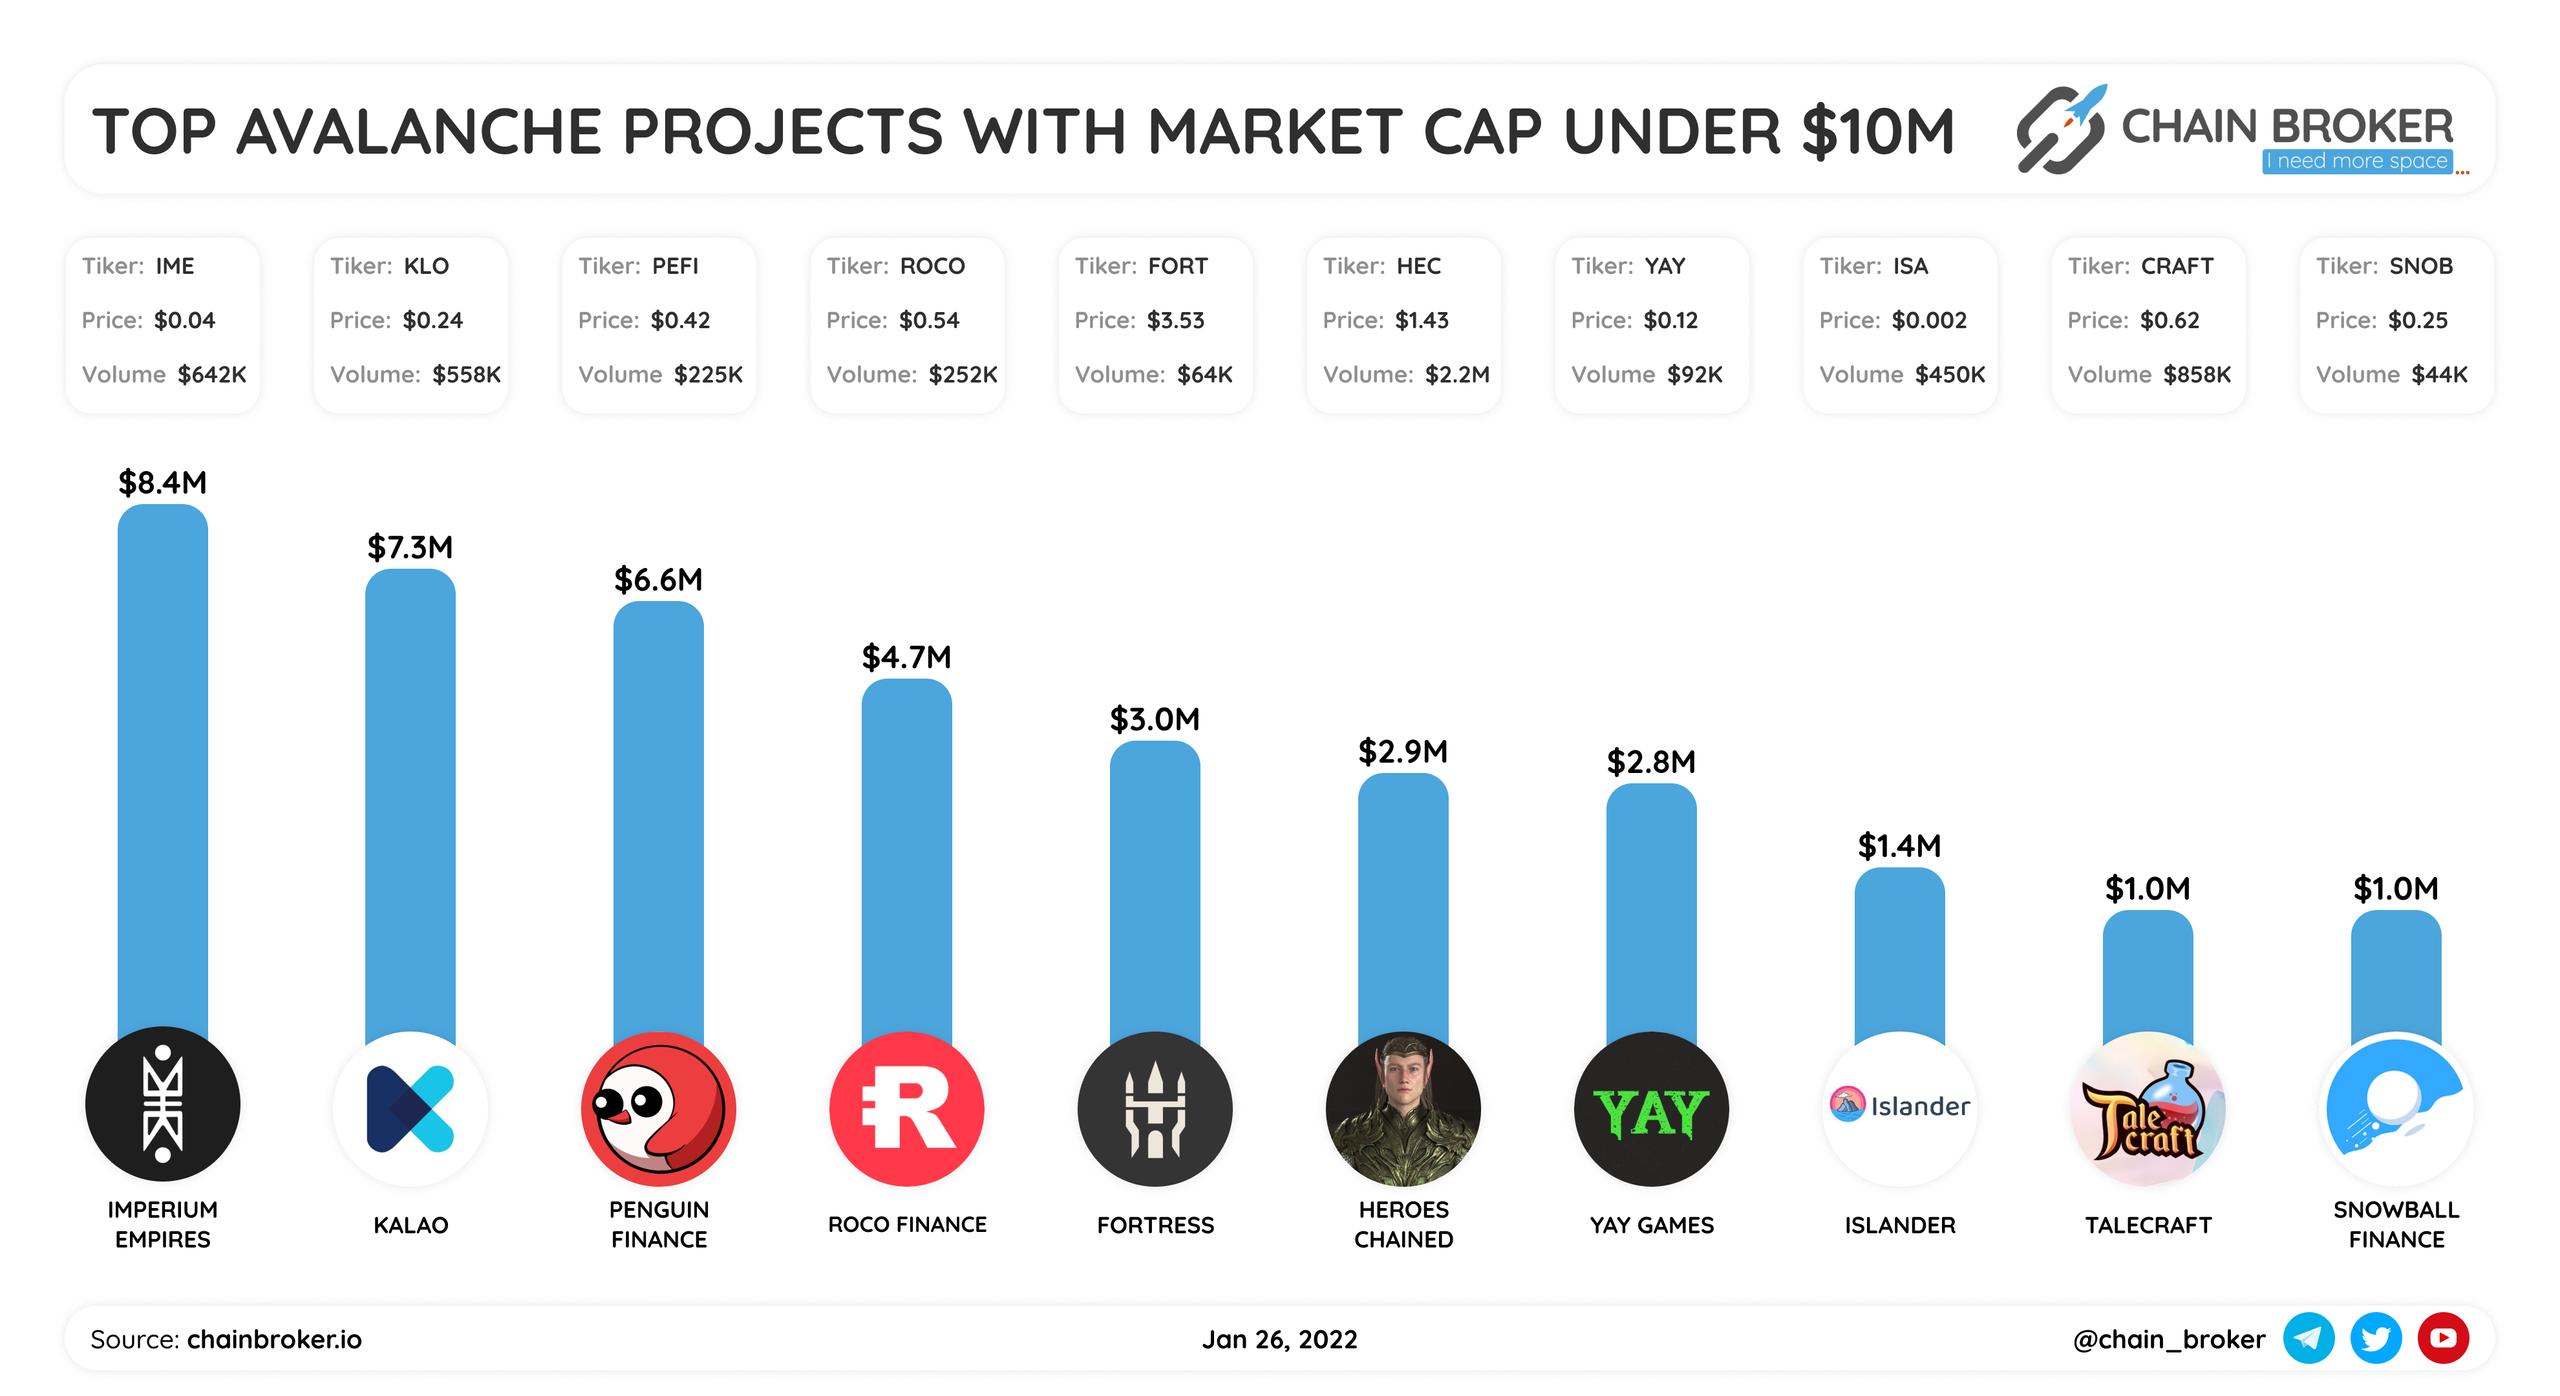 Top Avalanche projects with Market Cap under $10M